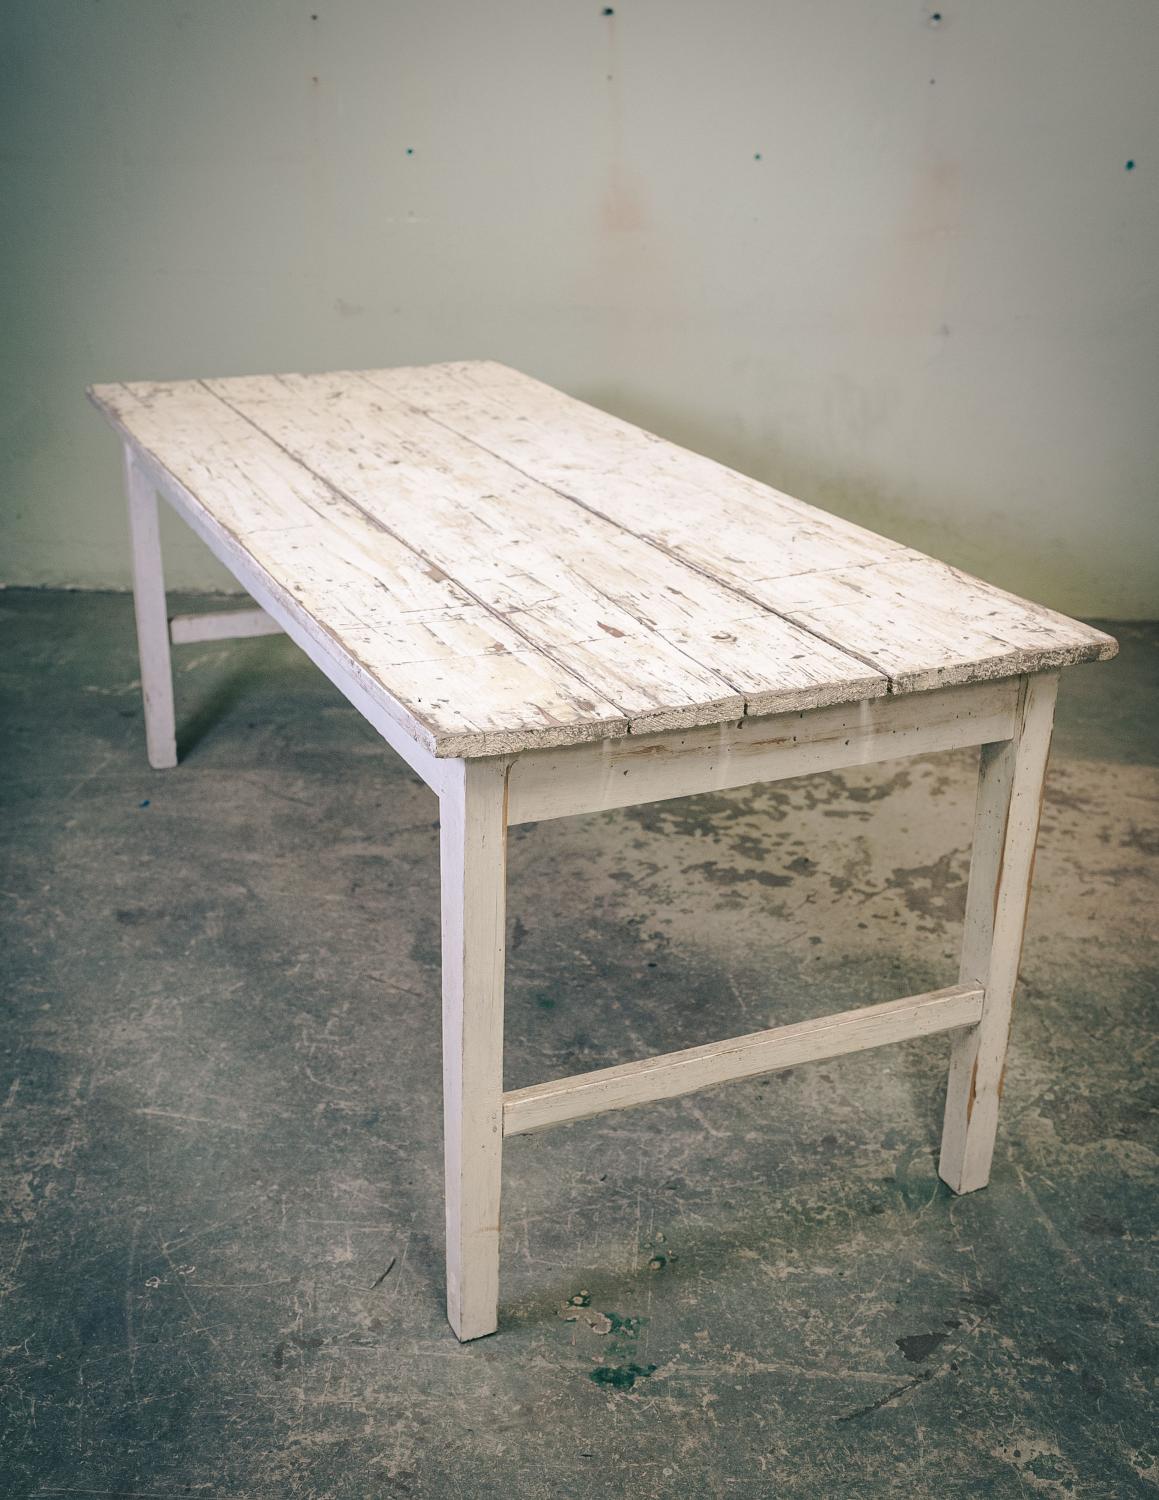 Remake table made of recycled material